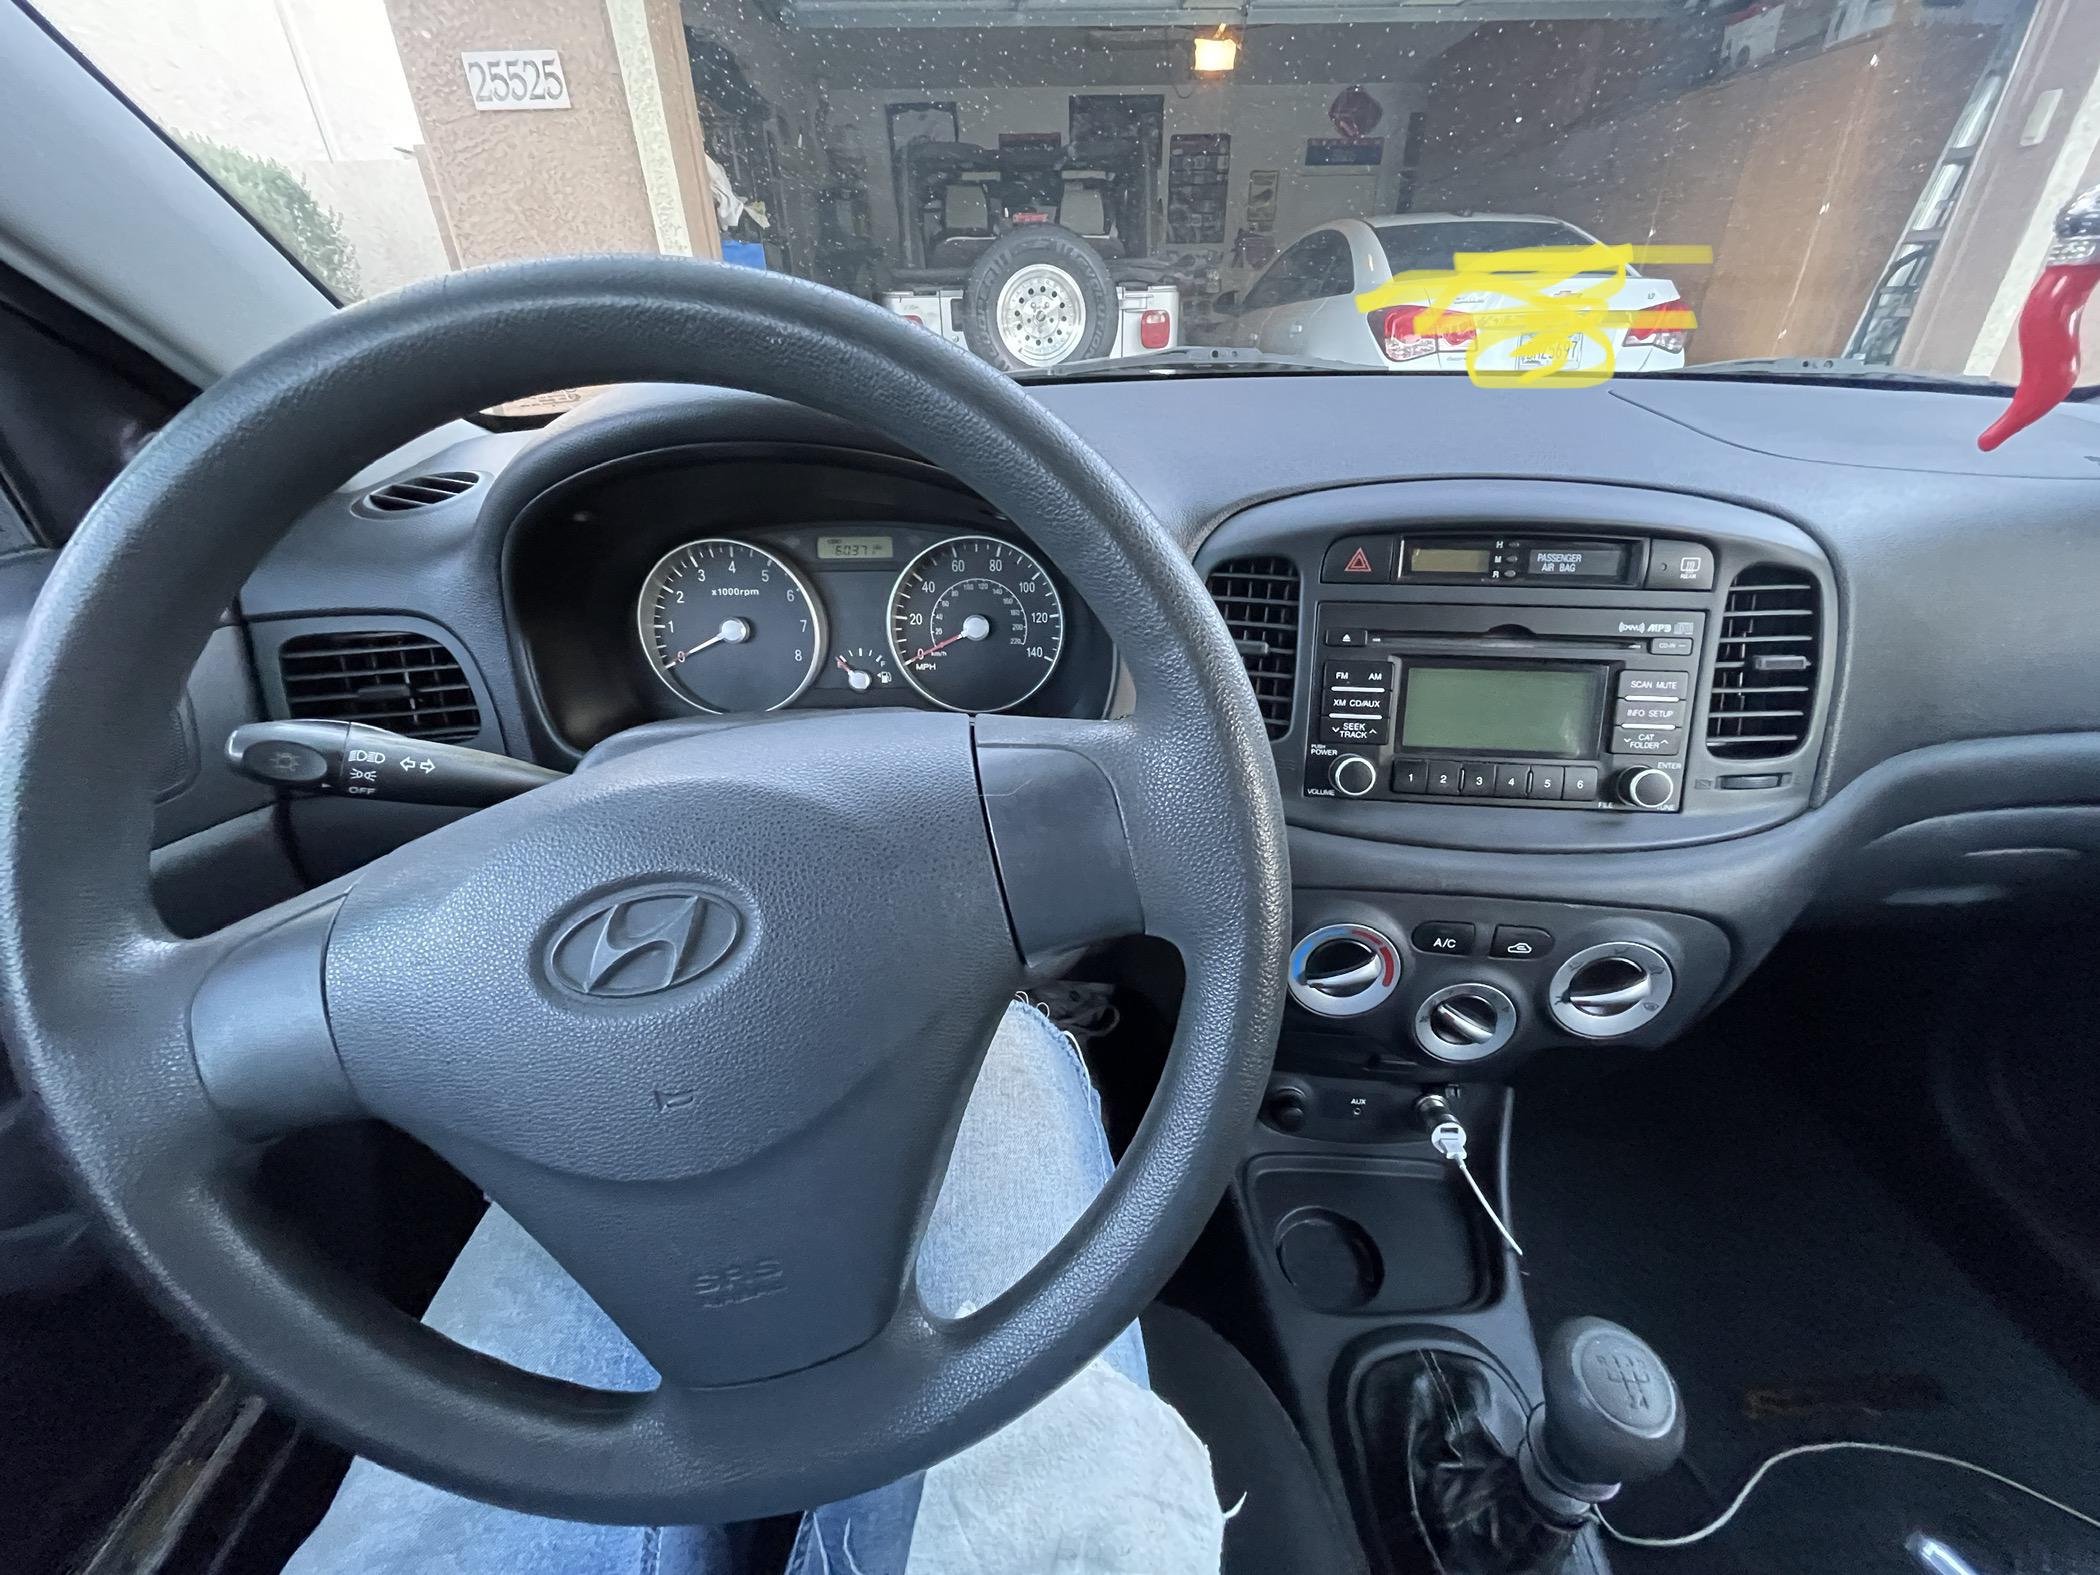 2009 Hyundai Accent, 1 owner, 60k miles, 5 speed manual. My new to me  daily. : r/Hyundai